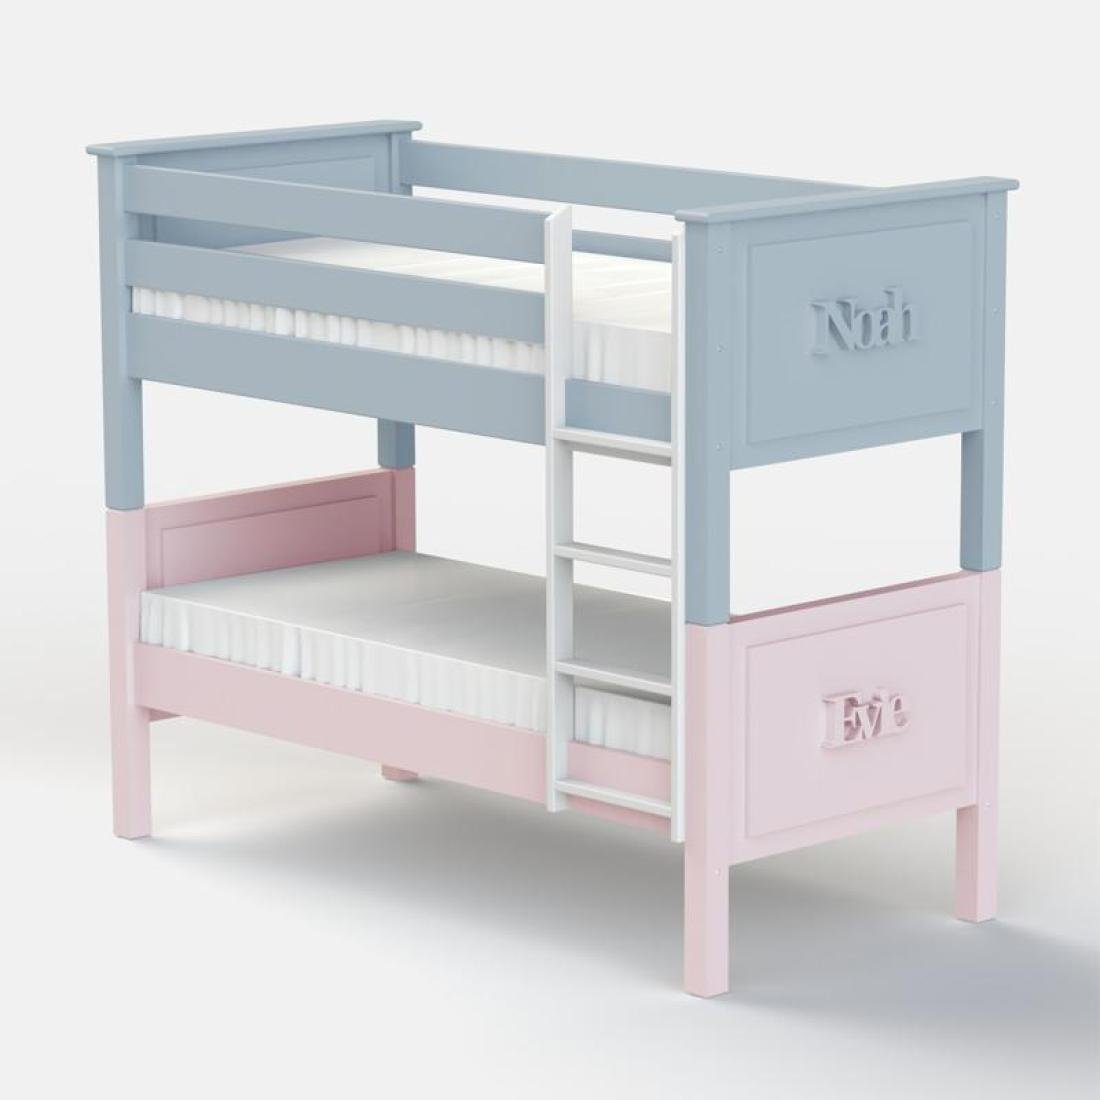 Bunk Beds For Girls And Boys 2021